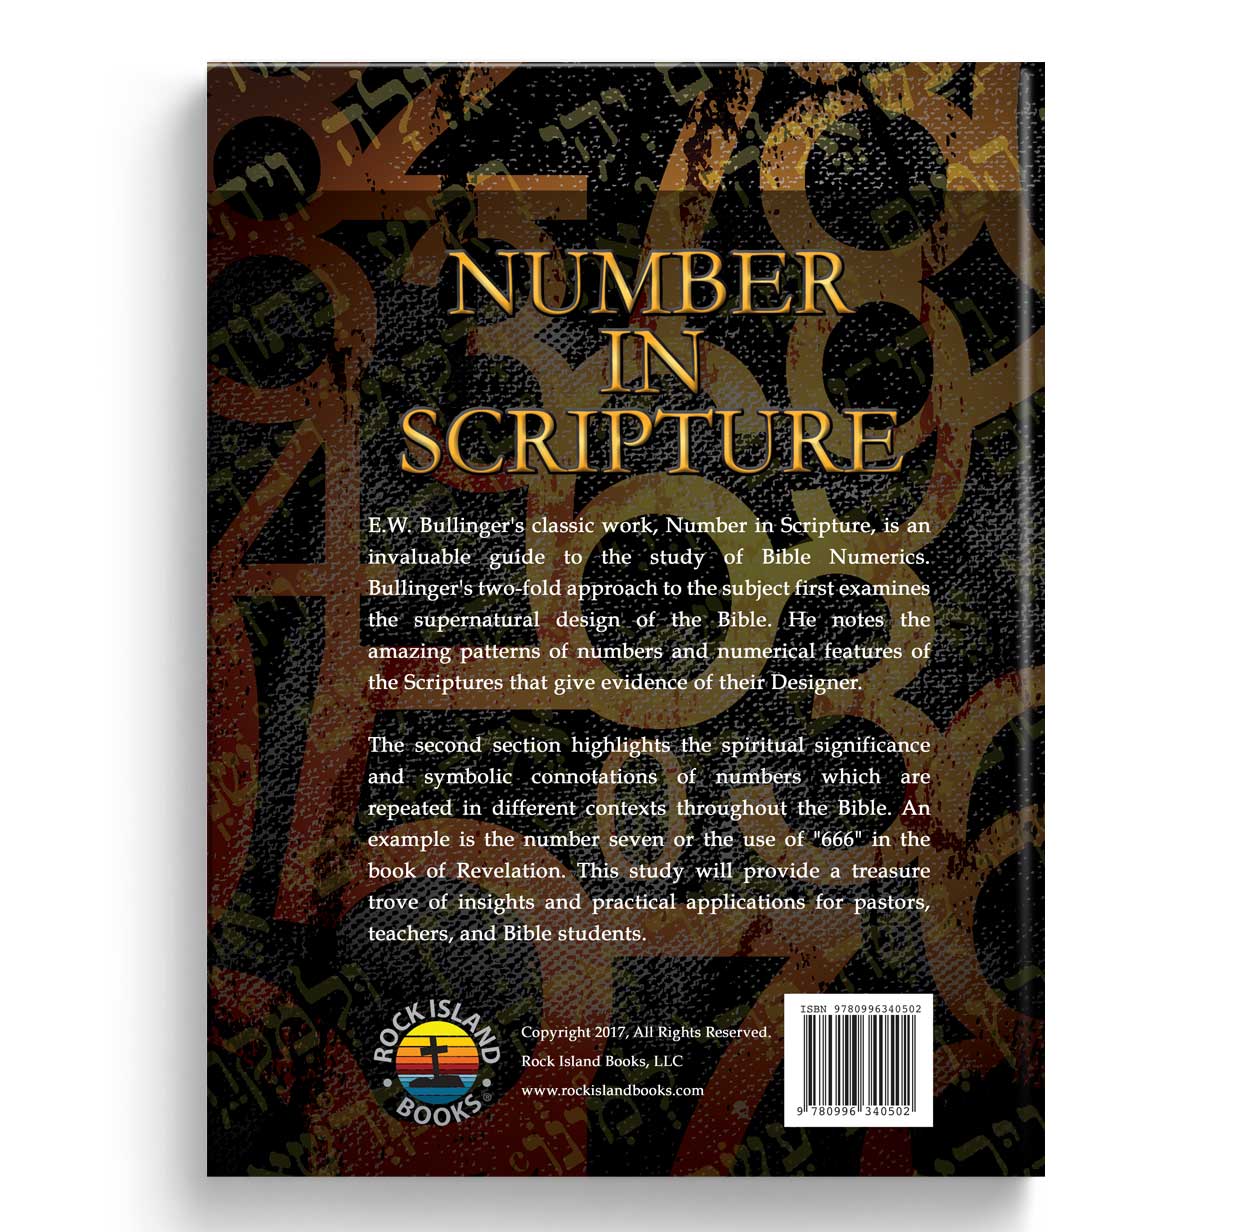 Number In Scripture: Its Supernatural Design and Spiritual Significance